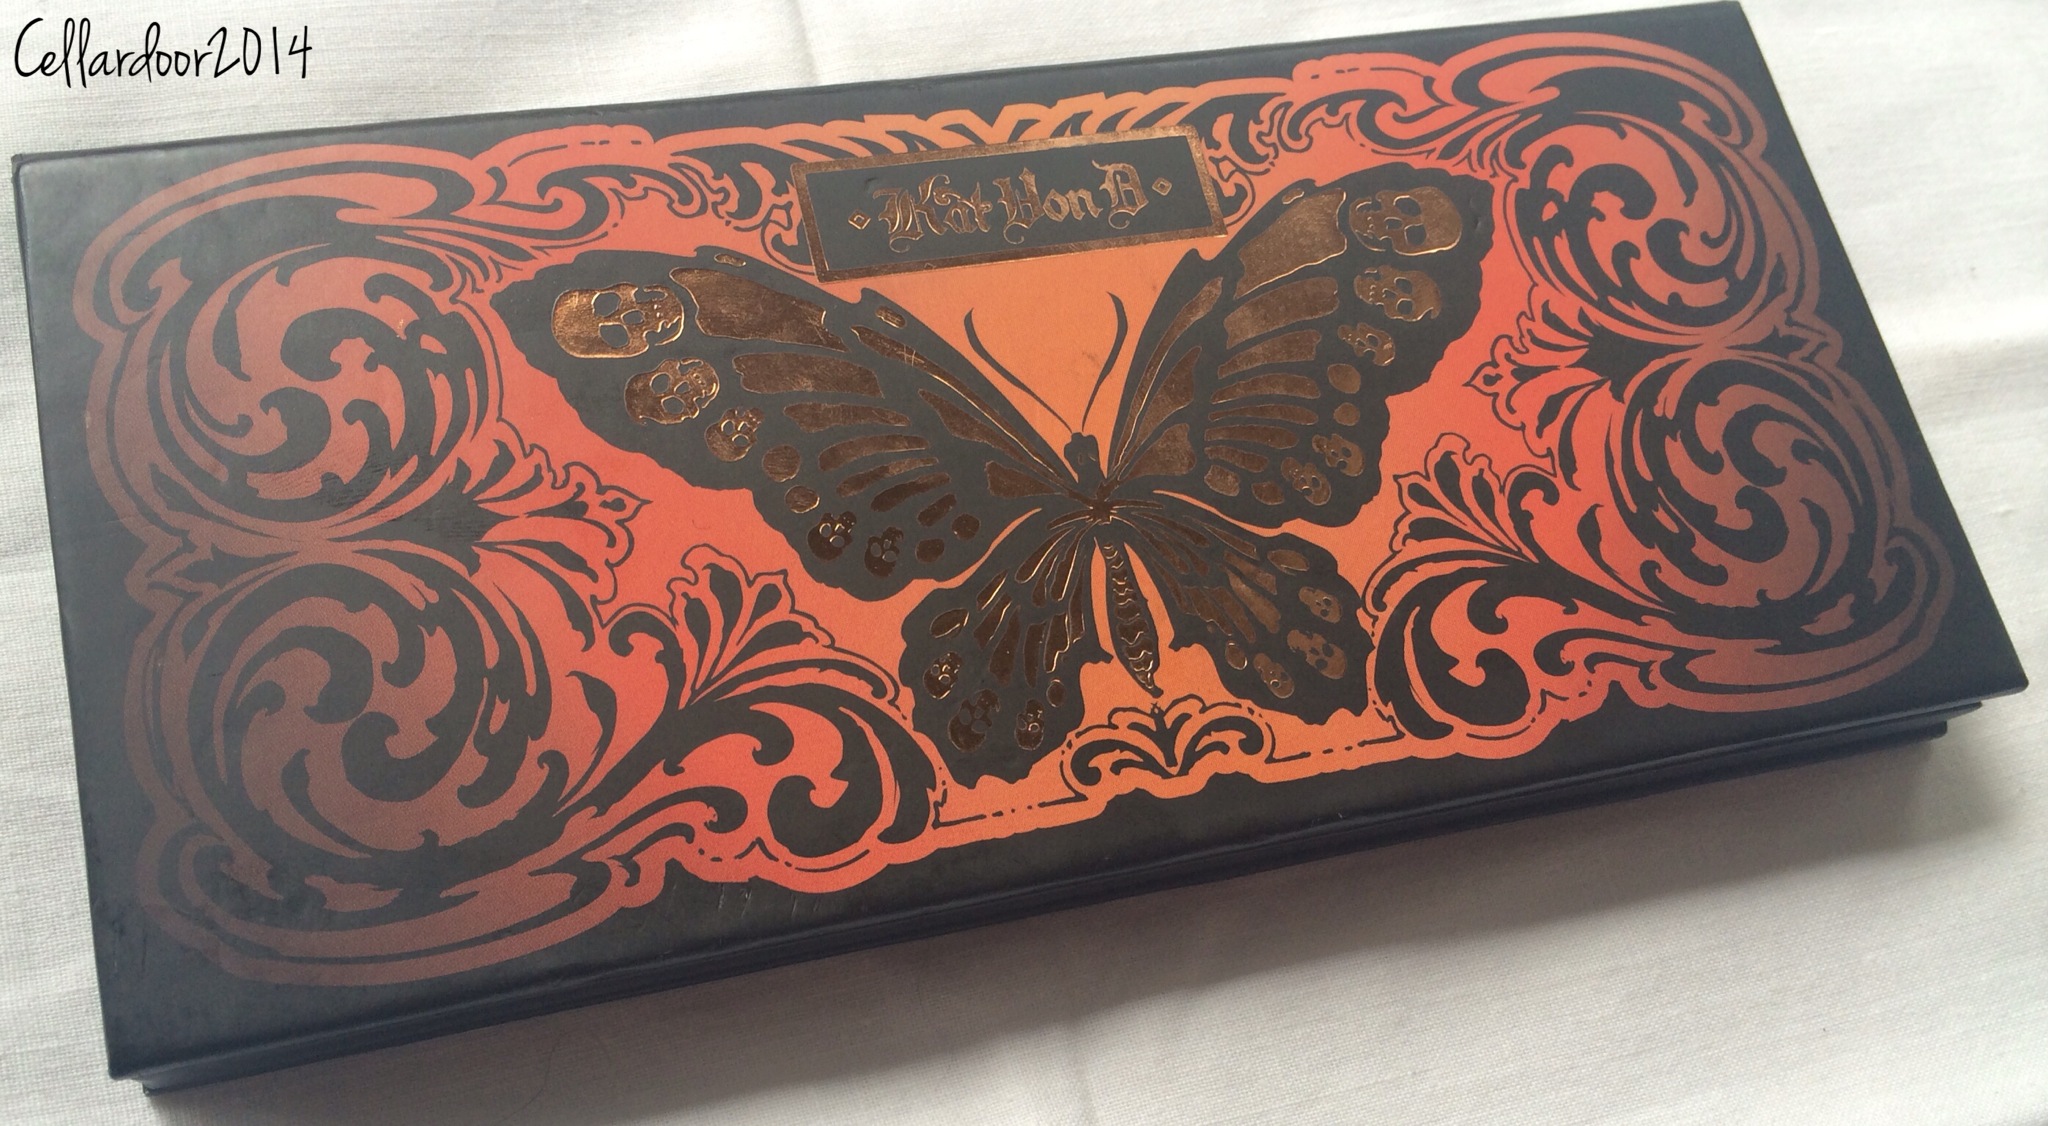 aditya chandramohan recommends kat von d butterfly pic